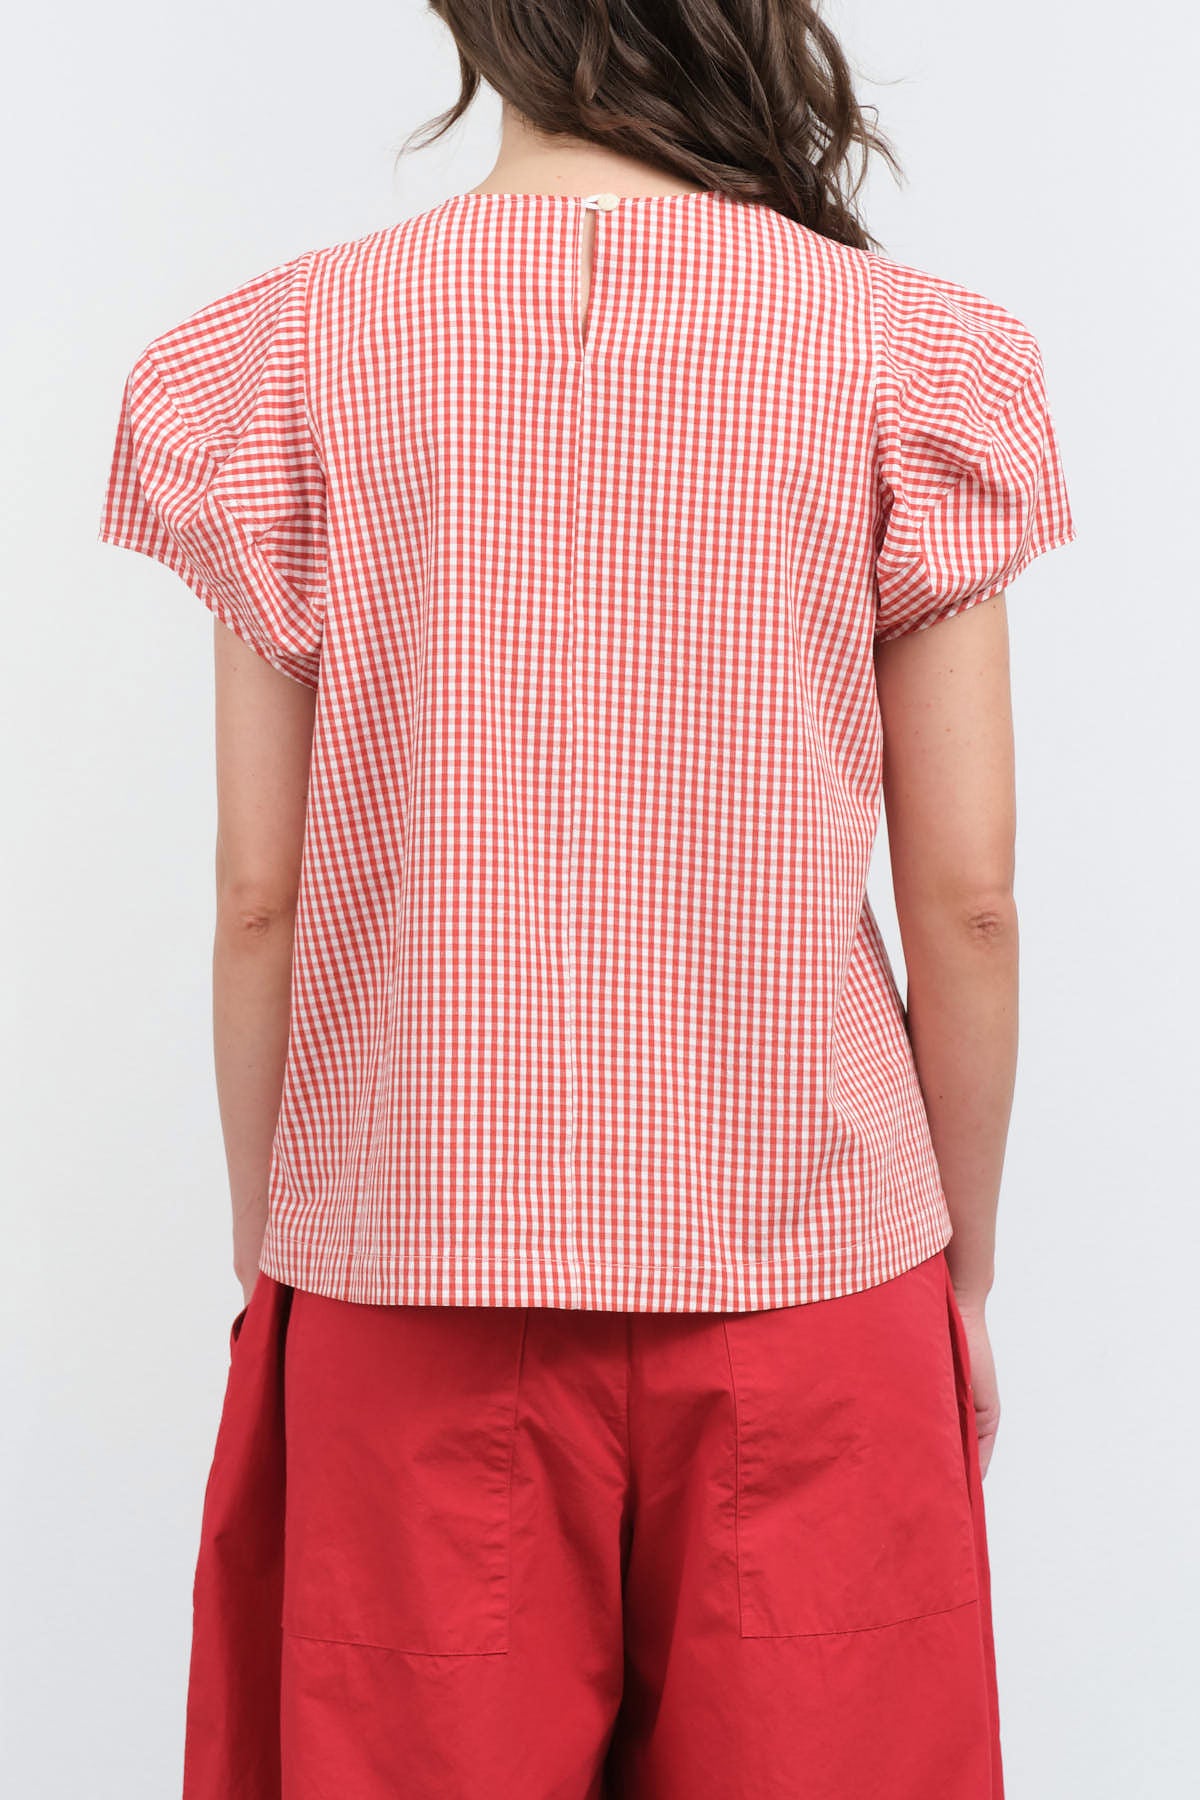 Back view of Calita Blouse in Red Gingham